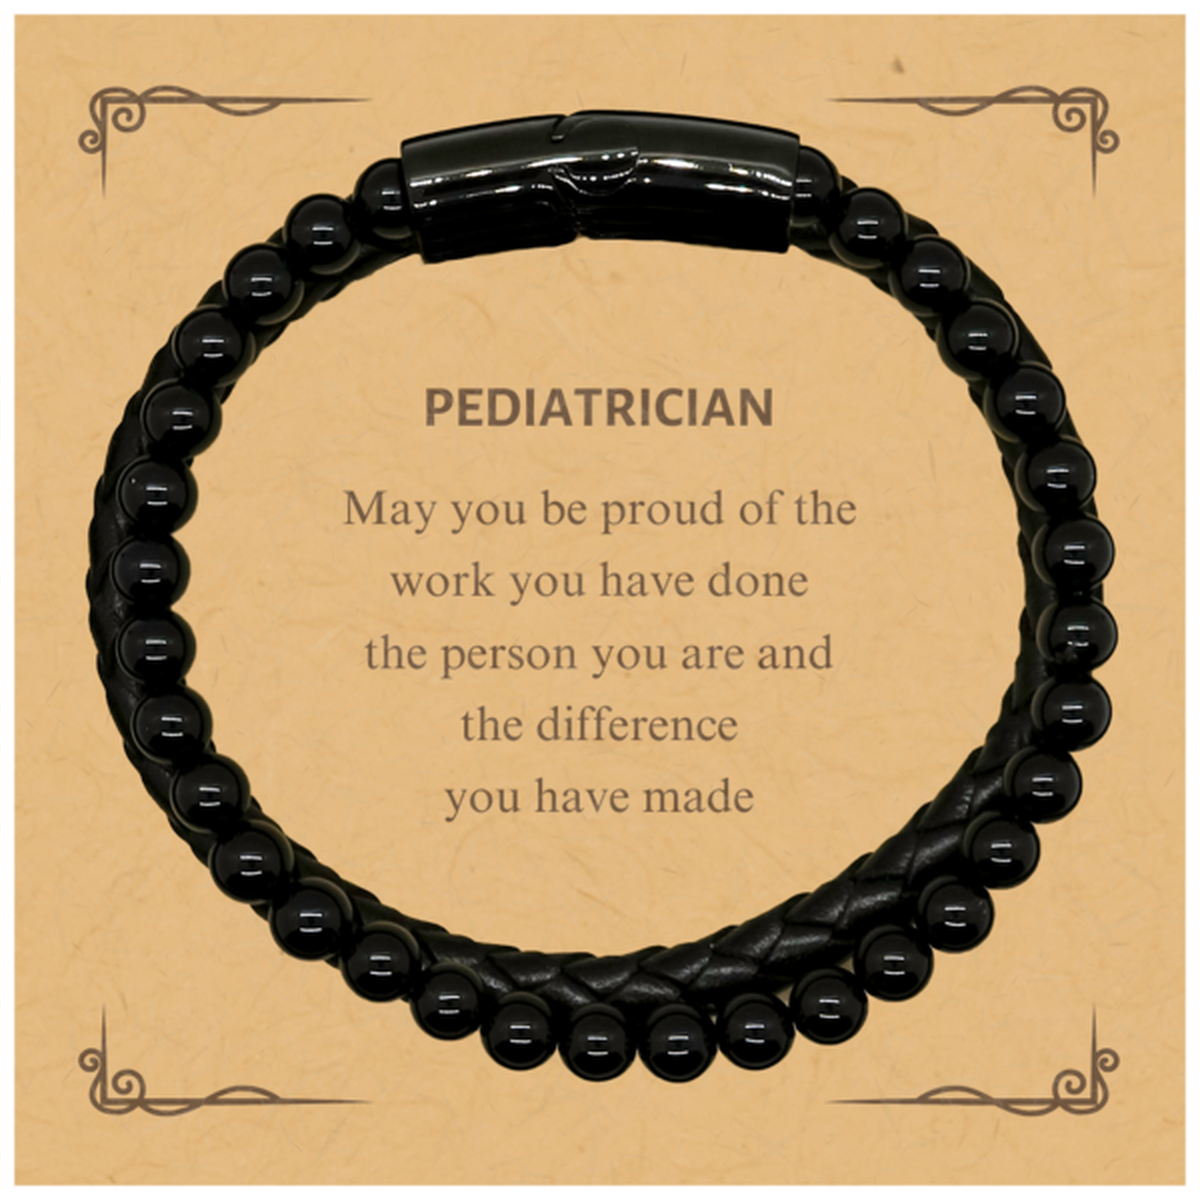 Pediatrician May you be proud of the work you have done, Retirement Pediatrician Stone Leather Bracelets for Colleague Appreciation Gifts Amazing for Pediatrician